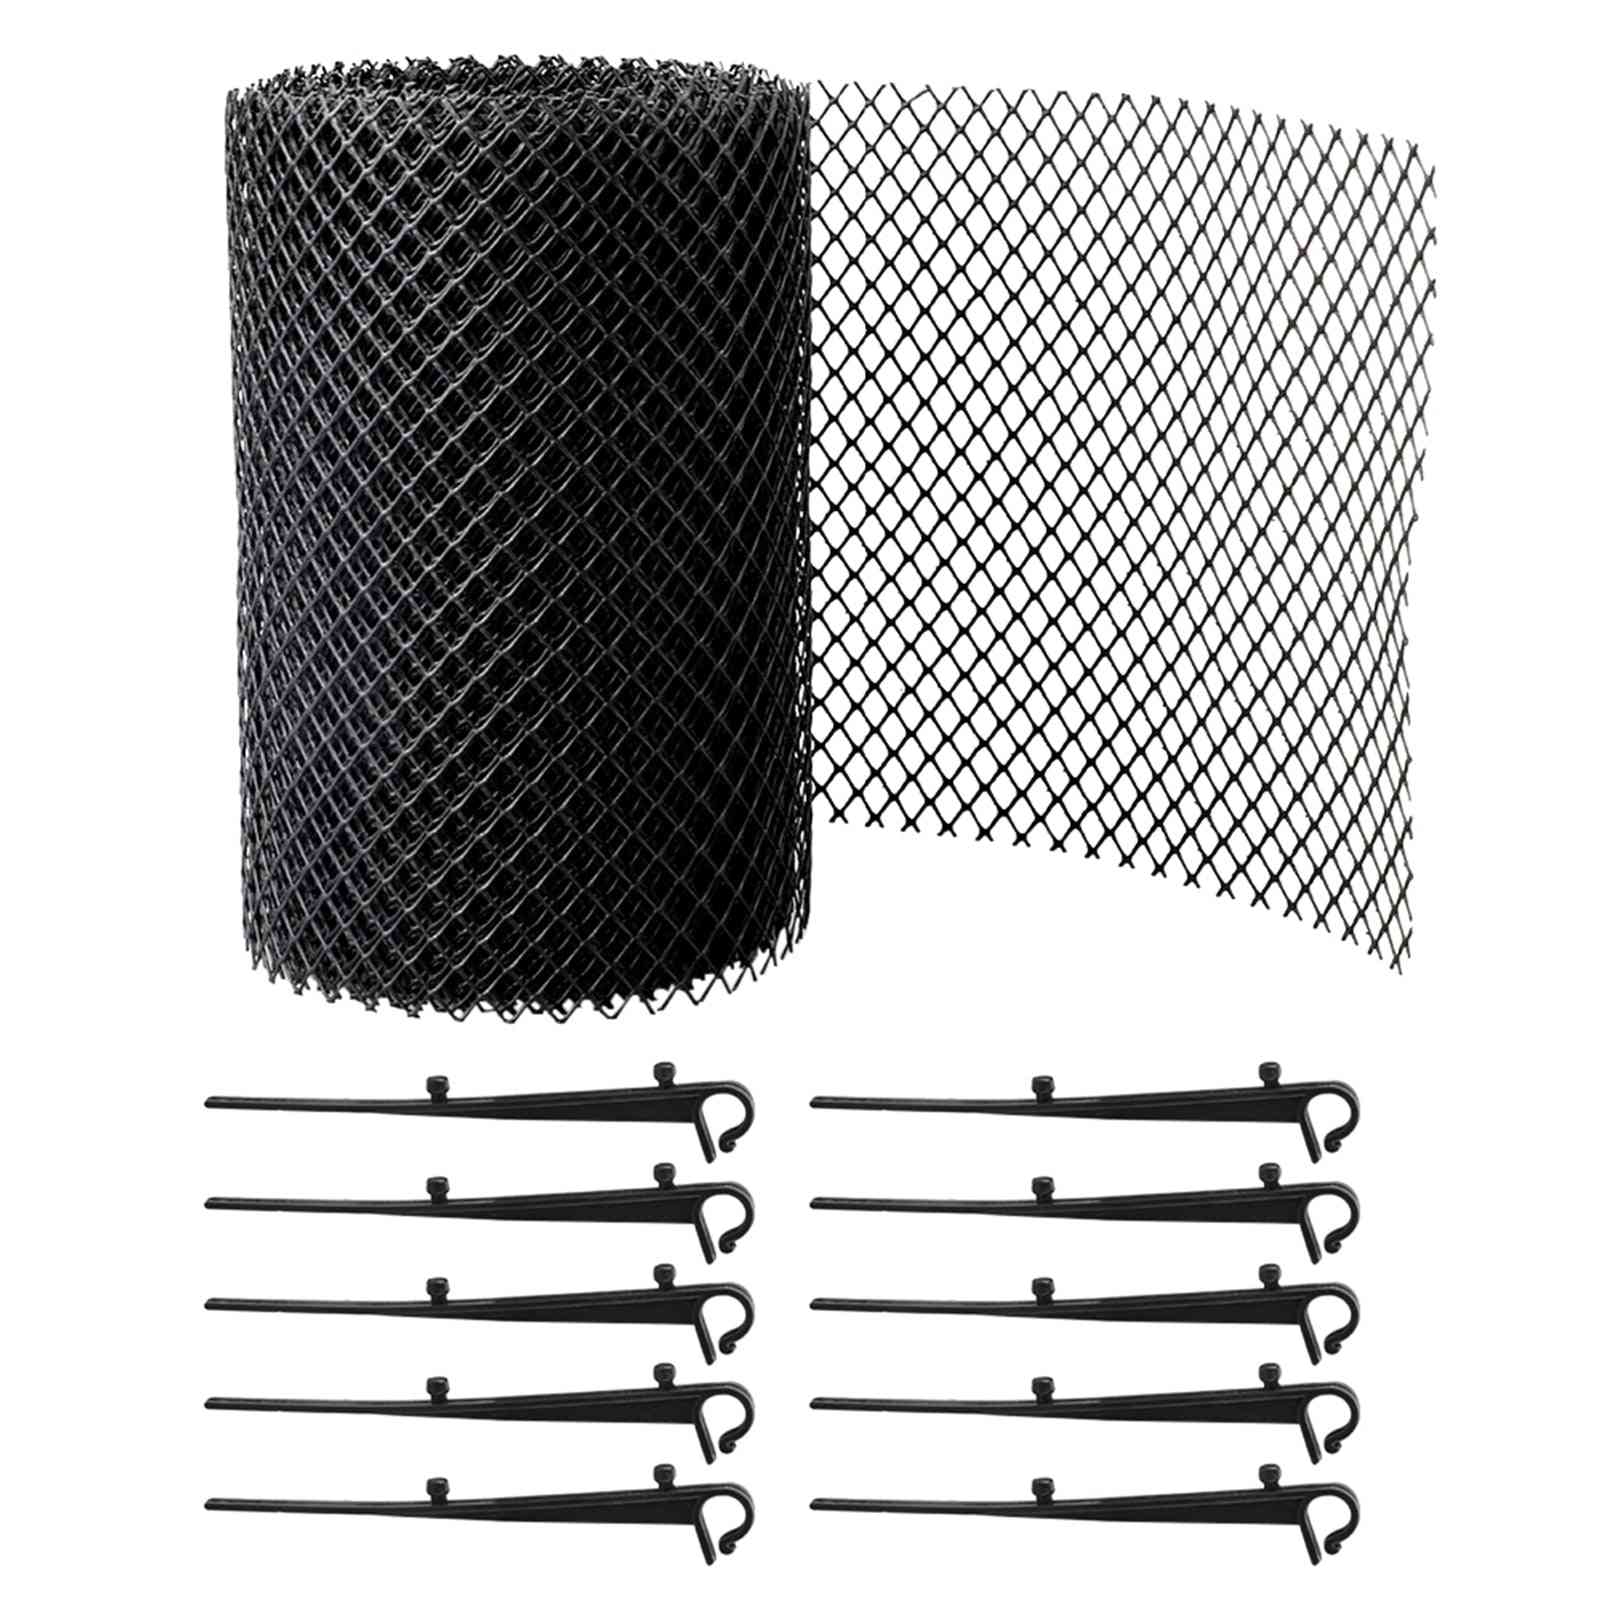 Anti Clogging, Stops Leaves, Reduce Overflow, Outdoor Drain Gutter Guard, Balcony Mesh Cover, Flexible Cleaning Tool